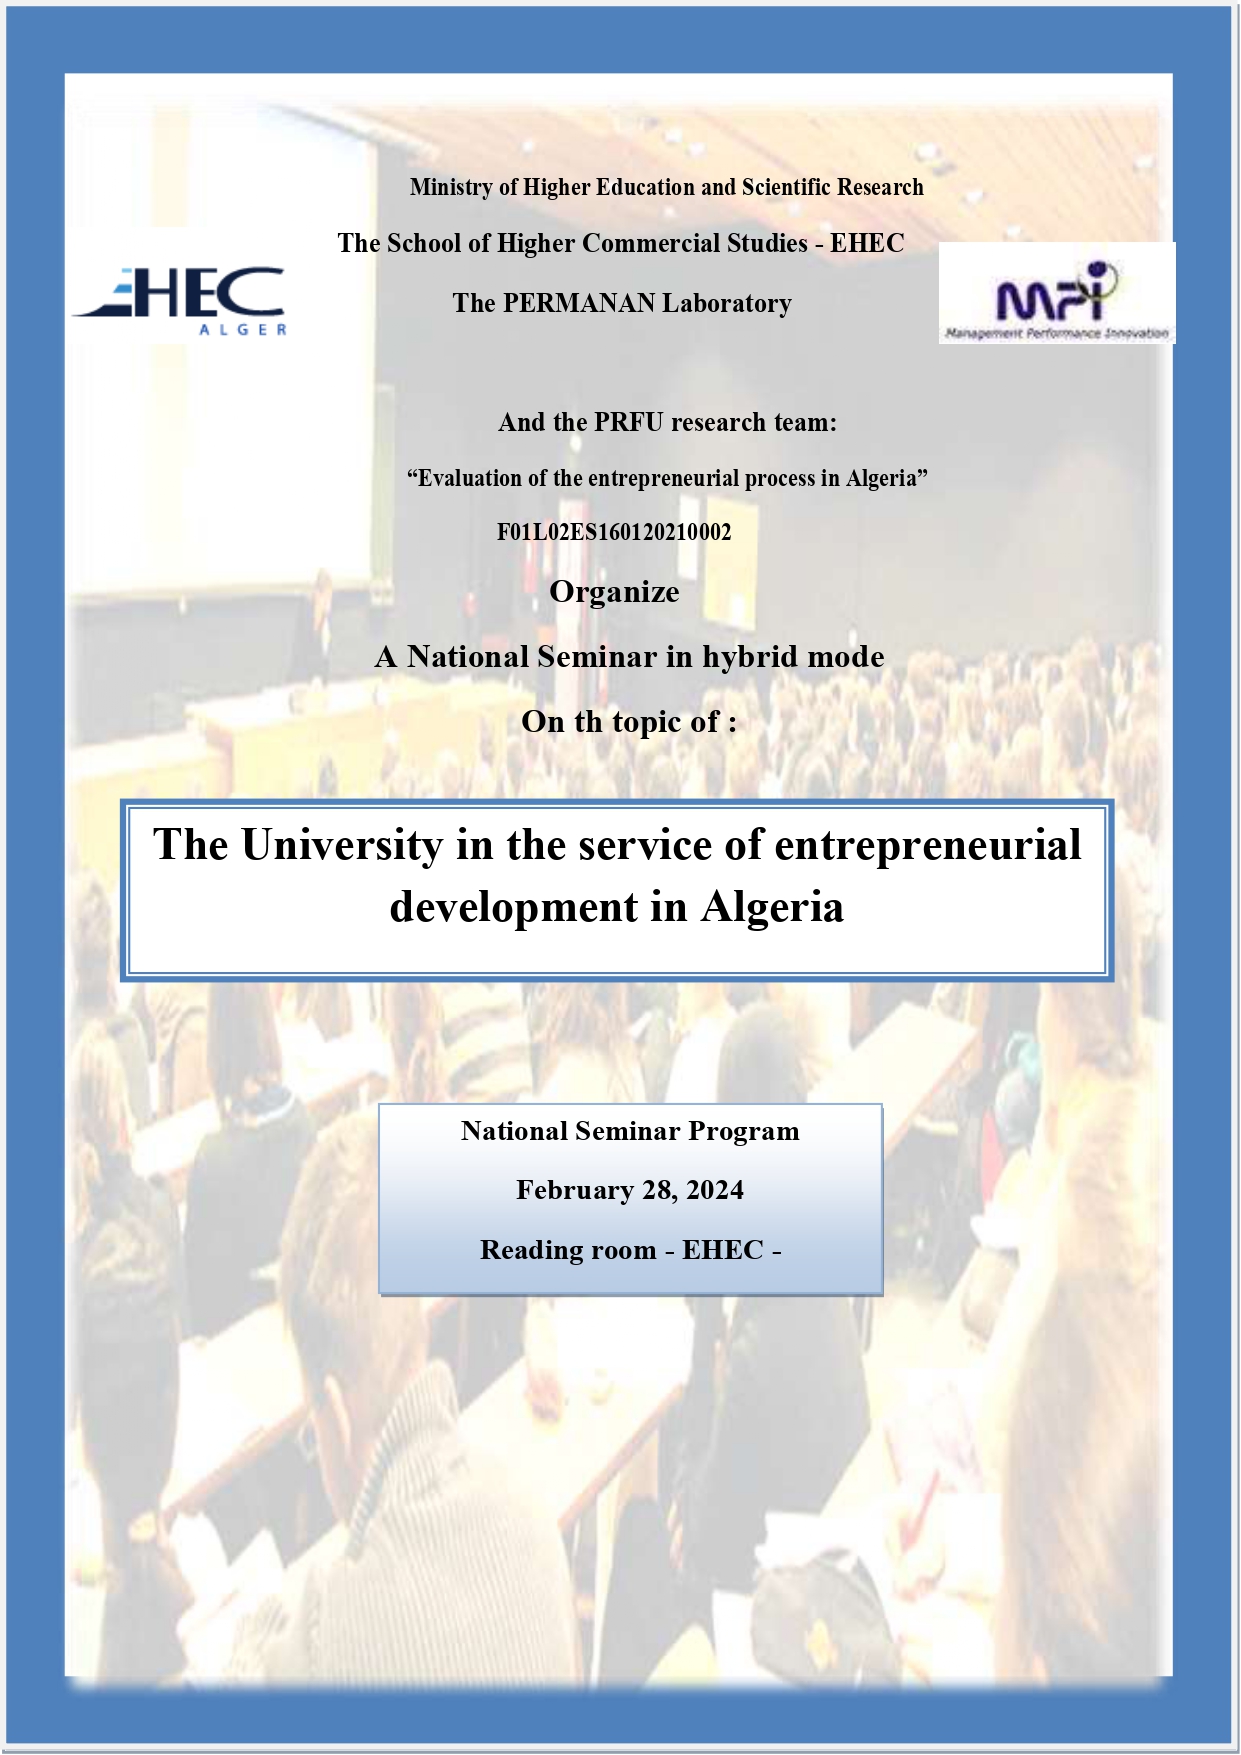 The PERMANAN Laboratory and the PRFU research team, “Evaluation of the entrepreneurial process in Algeria,” are organizing a national hybrid seminar